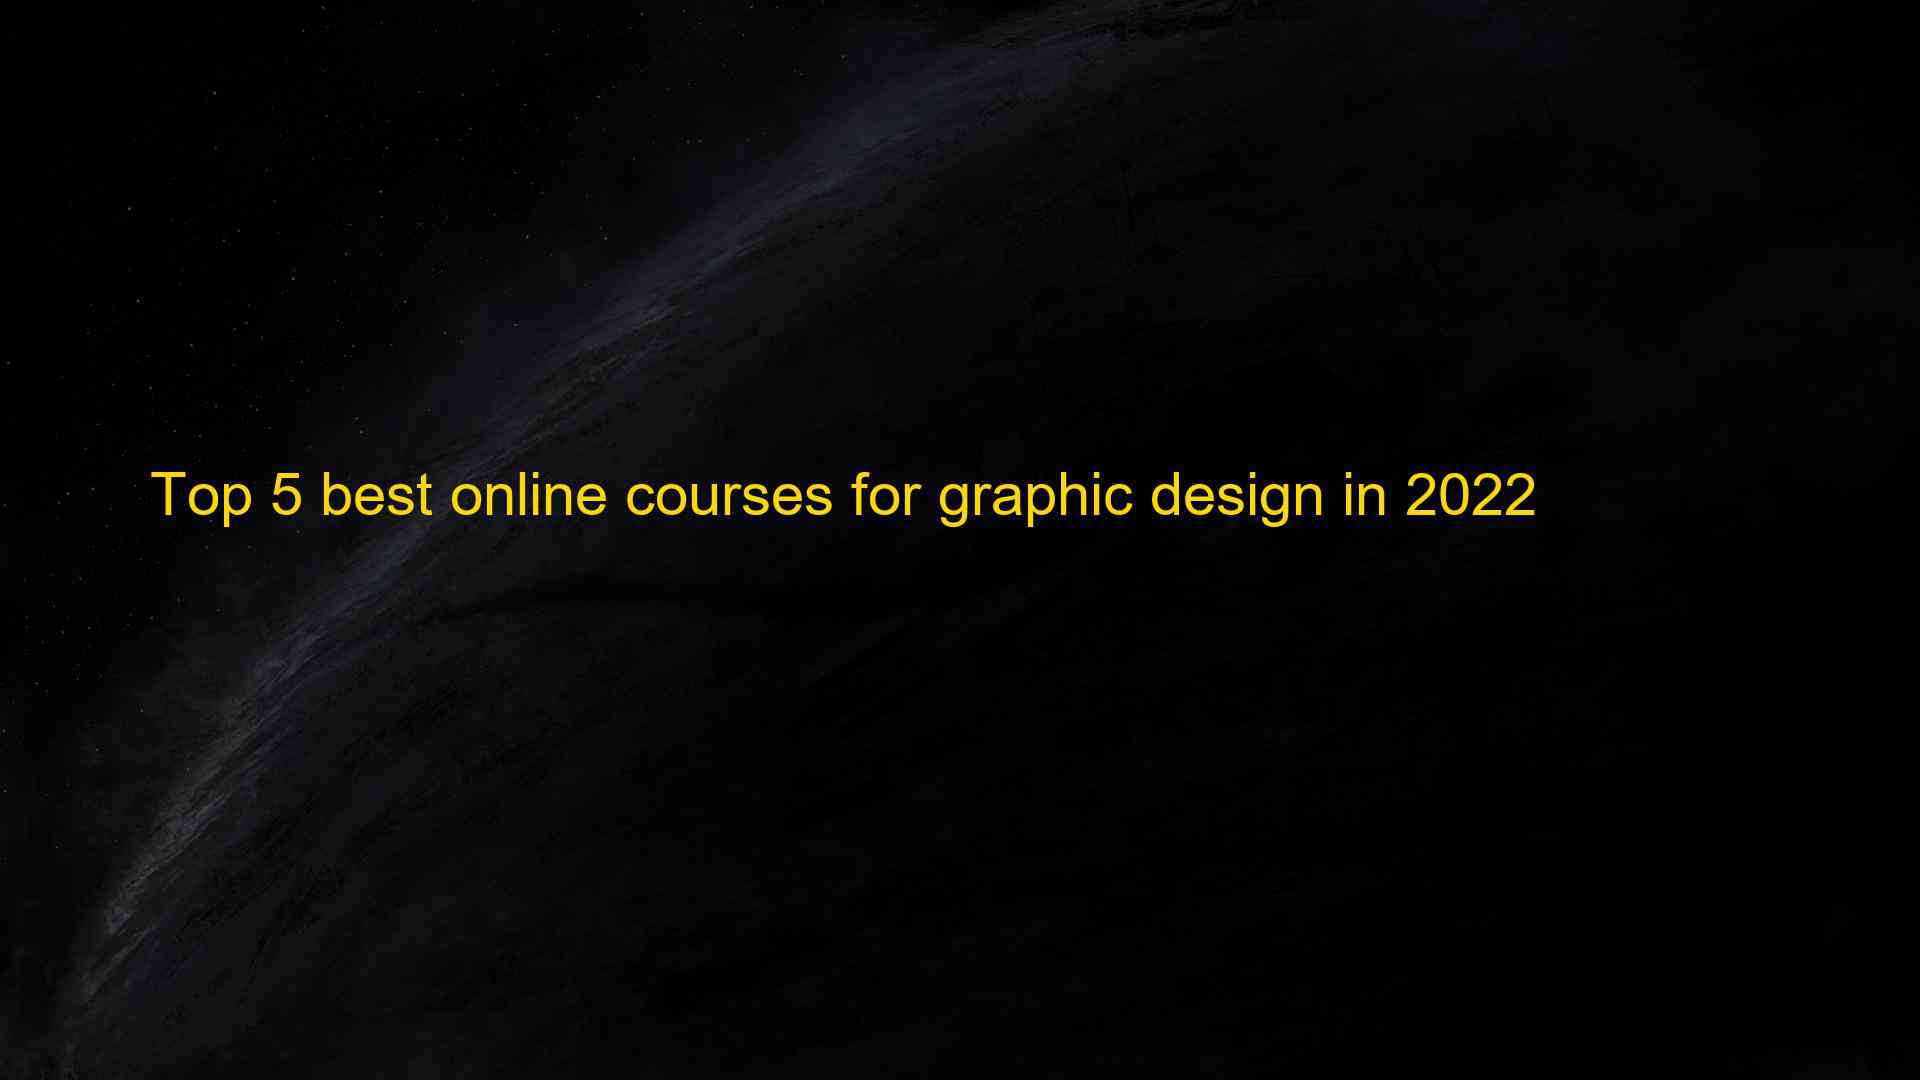 Top 5 best online courses for graphic design in 2022 1661885877